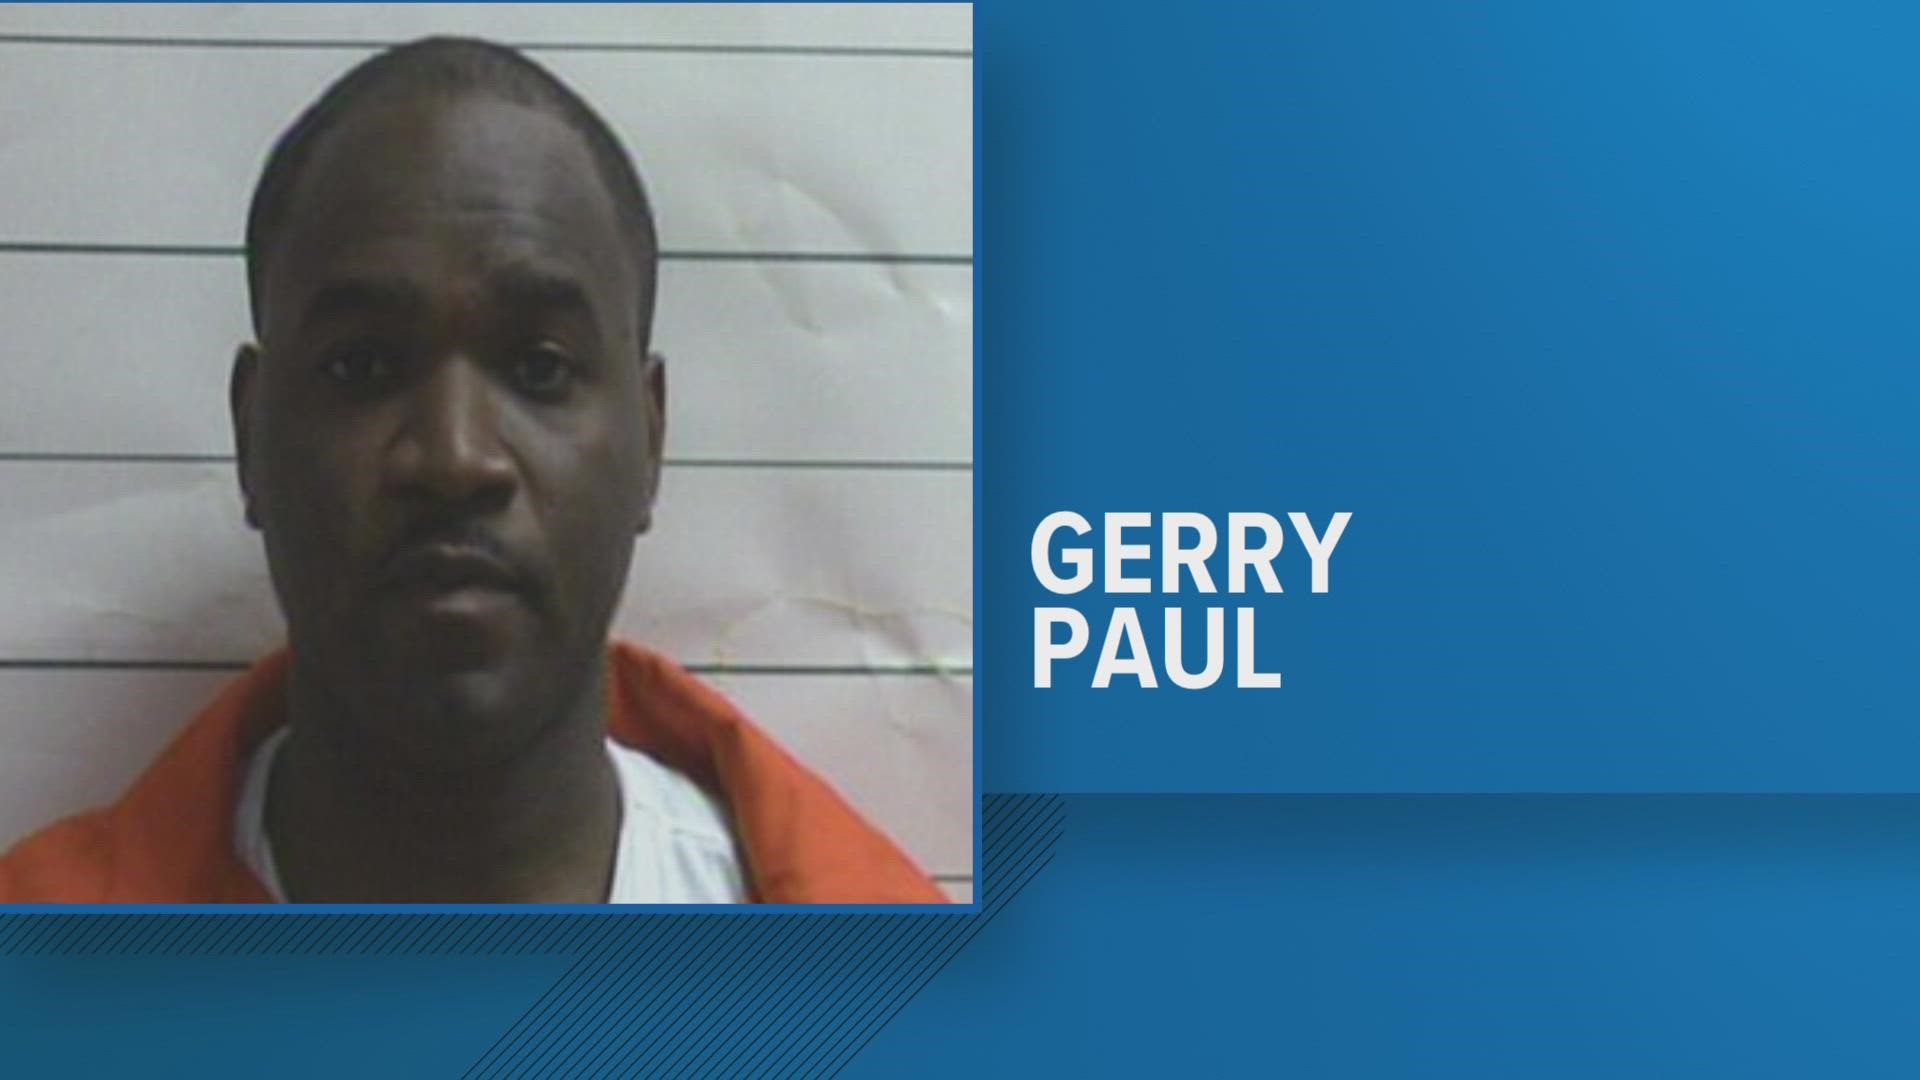 Gerry Paul allegedly raped, strangled, and bruised a woman. The rape kit was backlogged with more than 73,000 samples at the Louisiana State Police Crime Lab.